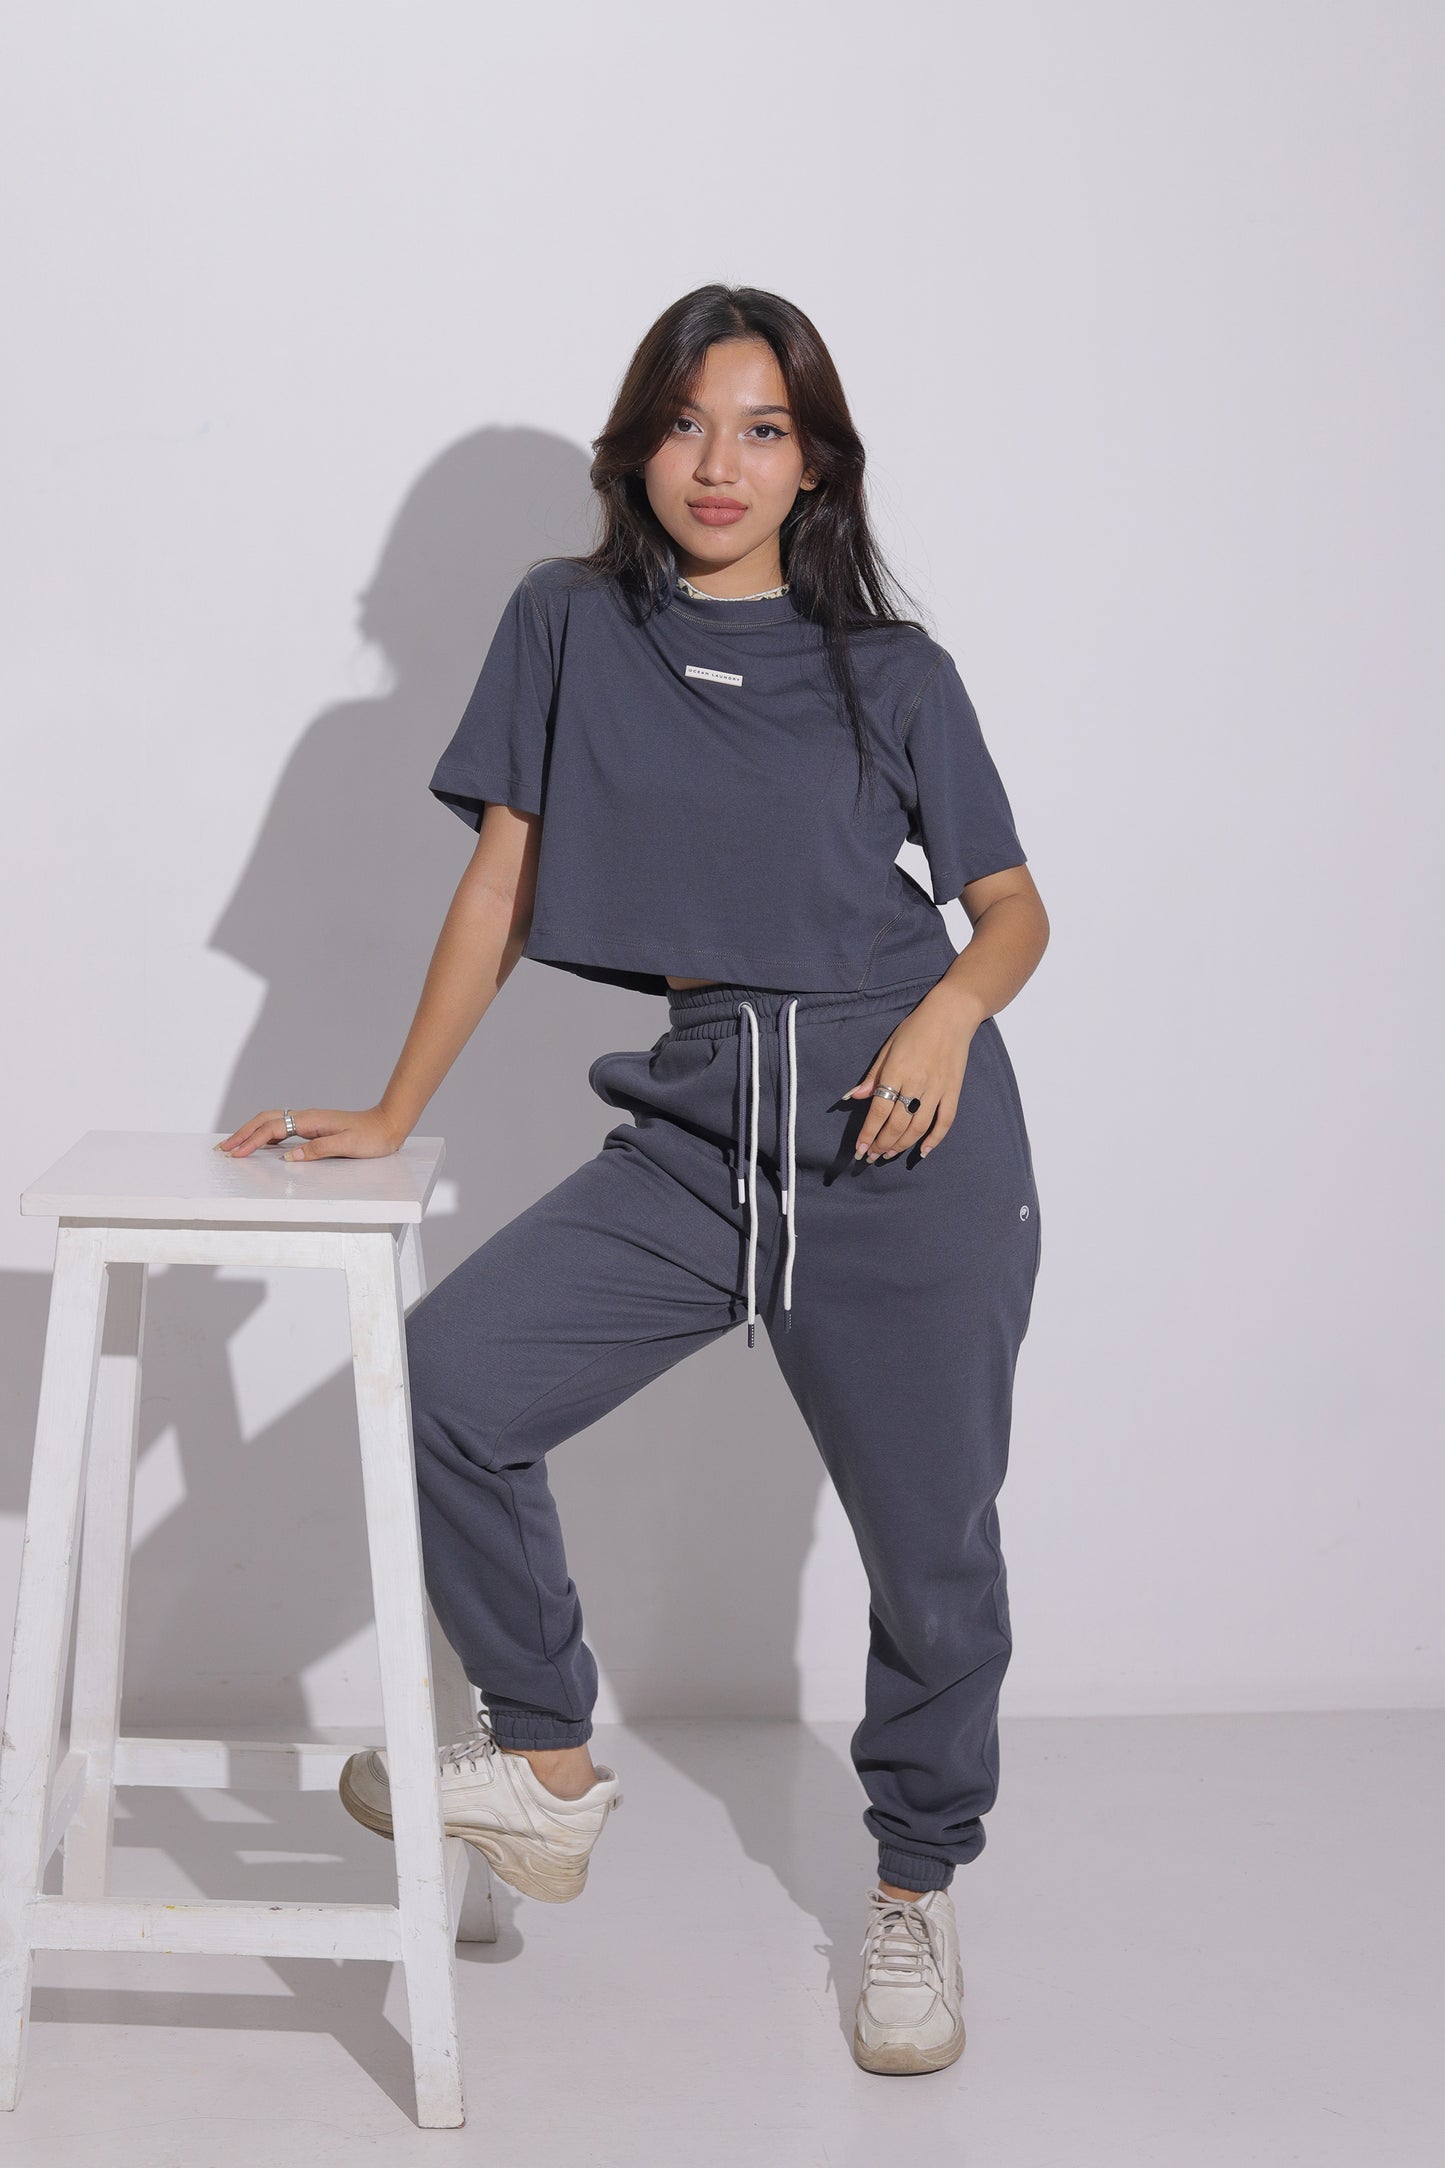 Cactus Baggy Sweatpants for Women - Charcoal